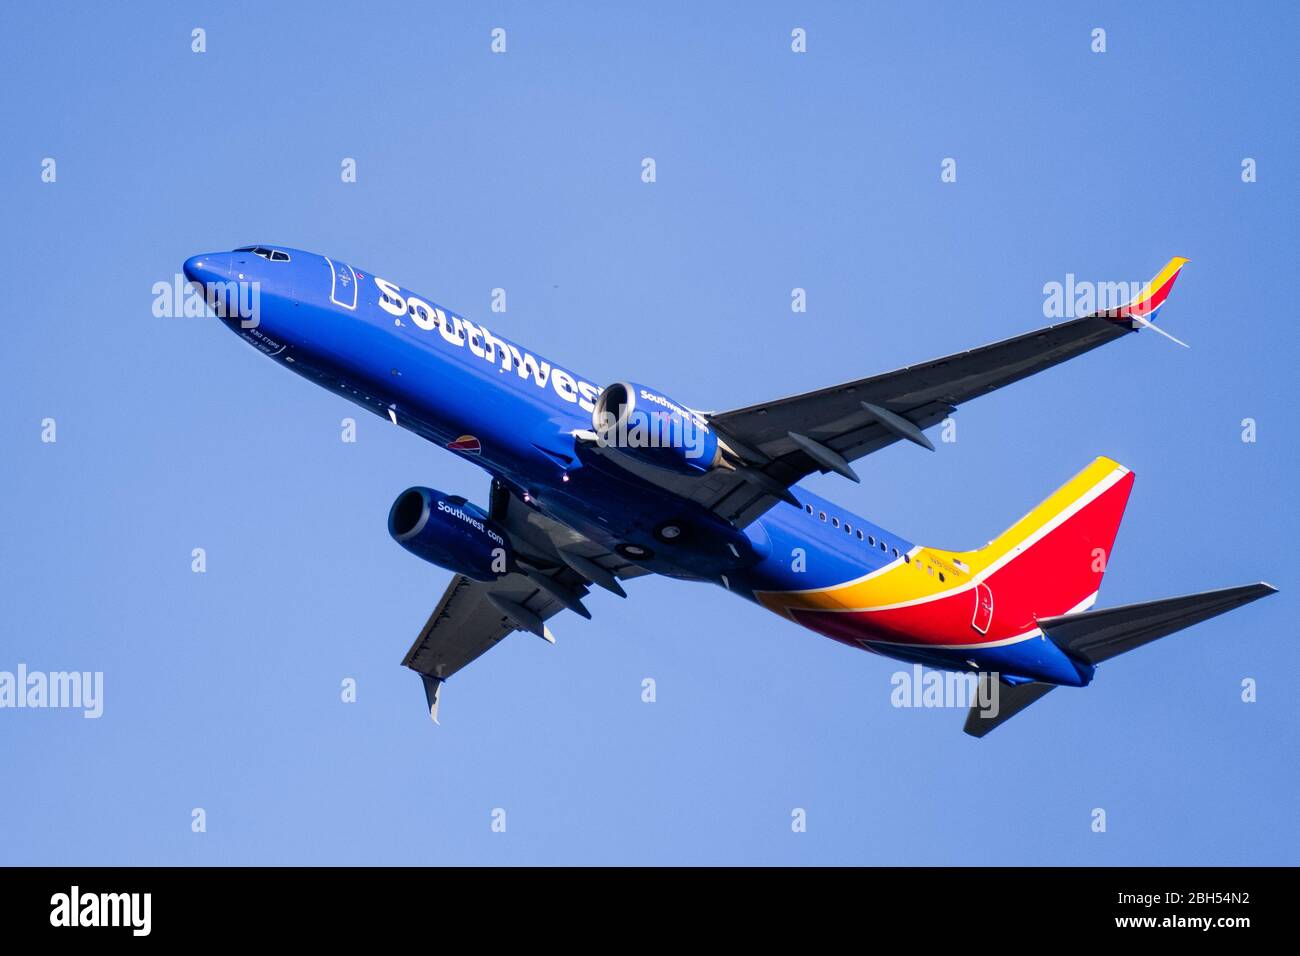 Mar 4, San Jose / CA / USA - Close up of Southwest Airlines aircraft in flight; the Southwest Airlines Heart logo visible on the airplane underbelly; Stock Photo